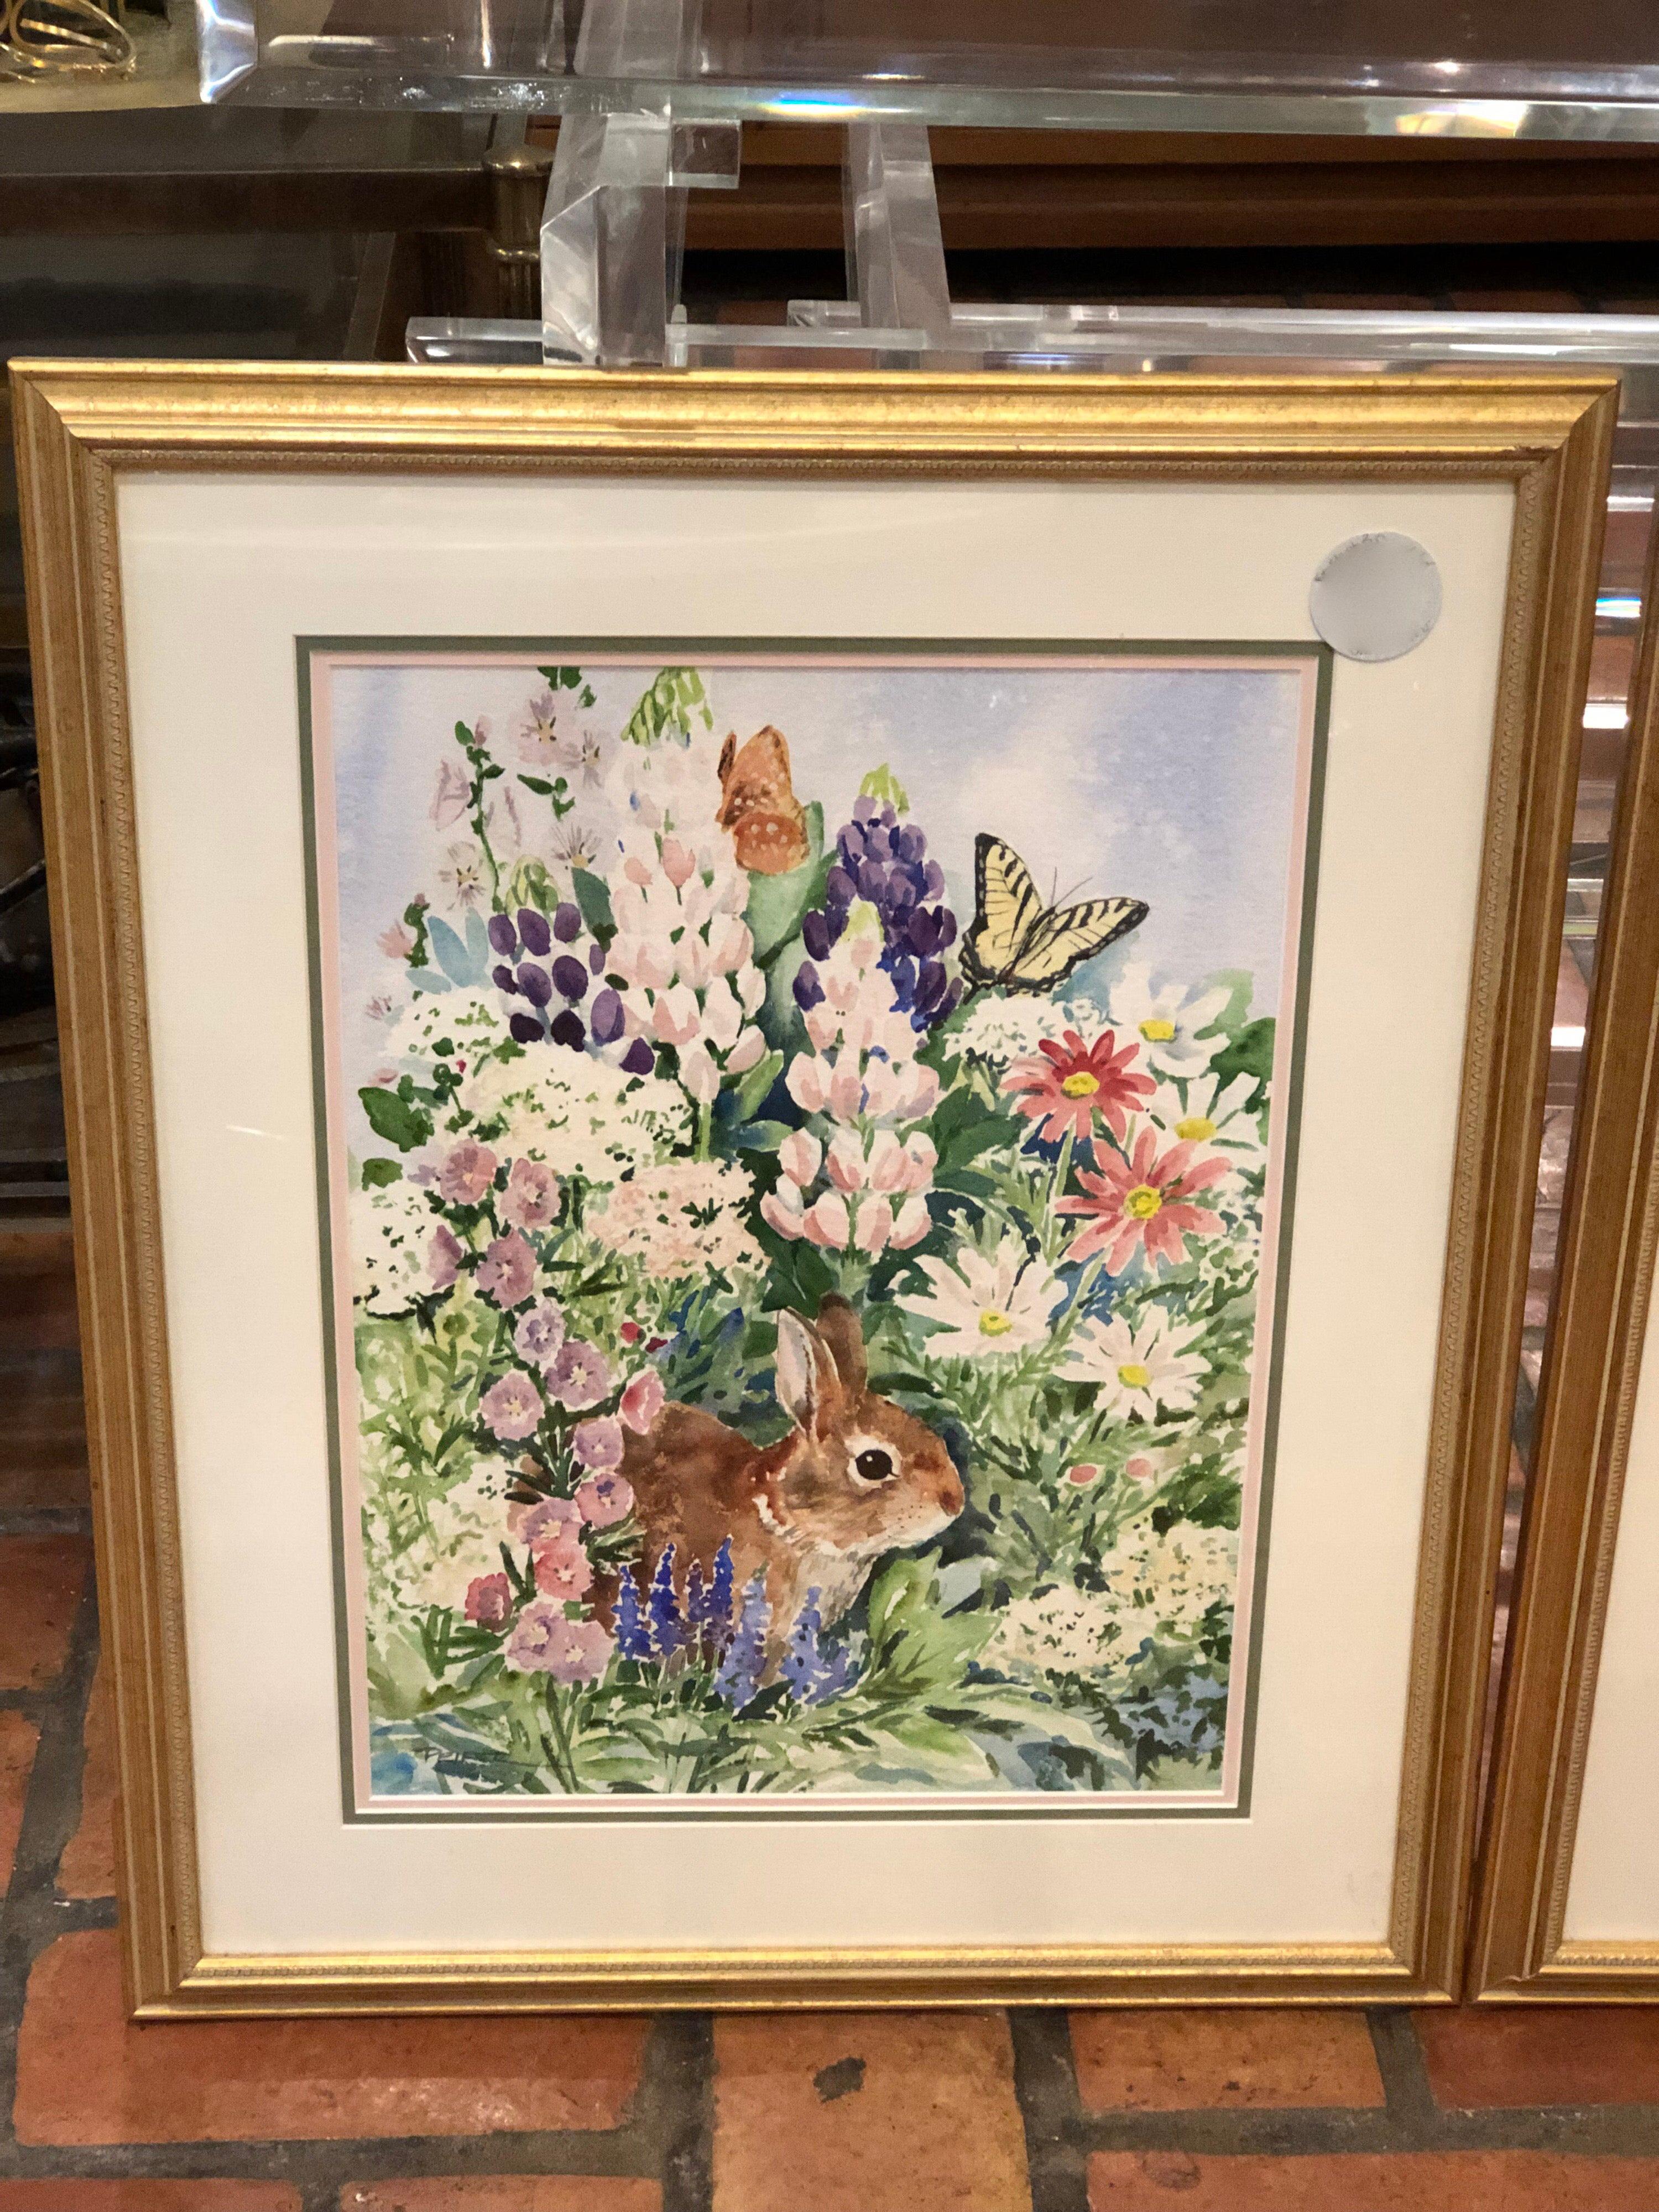 Pair of signed watercolors by Susan Peifer. Adorable pair of bunny watercolors. Nicely matted in gold leaf frames. Please confirm dimensions prior to purchase.